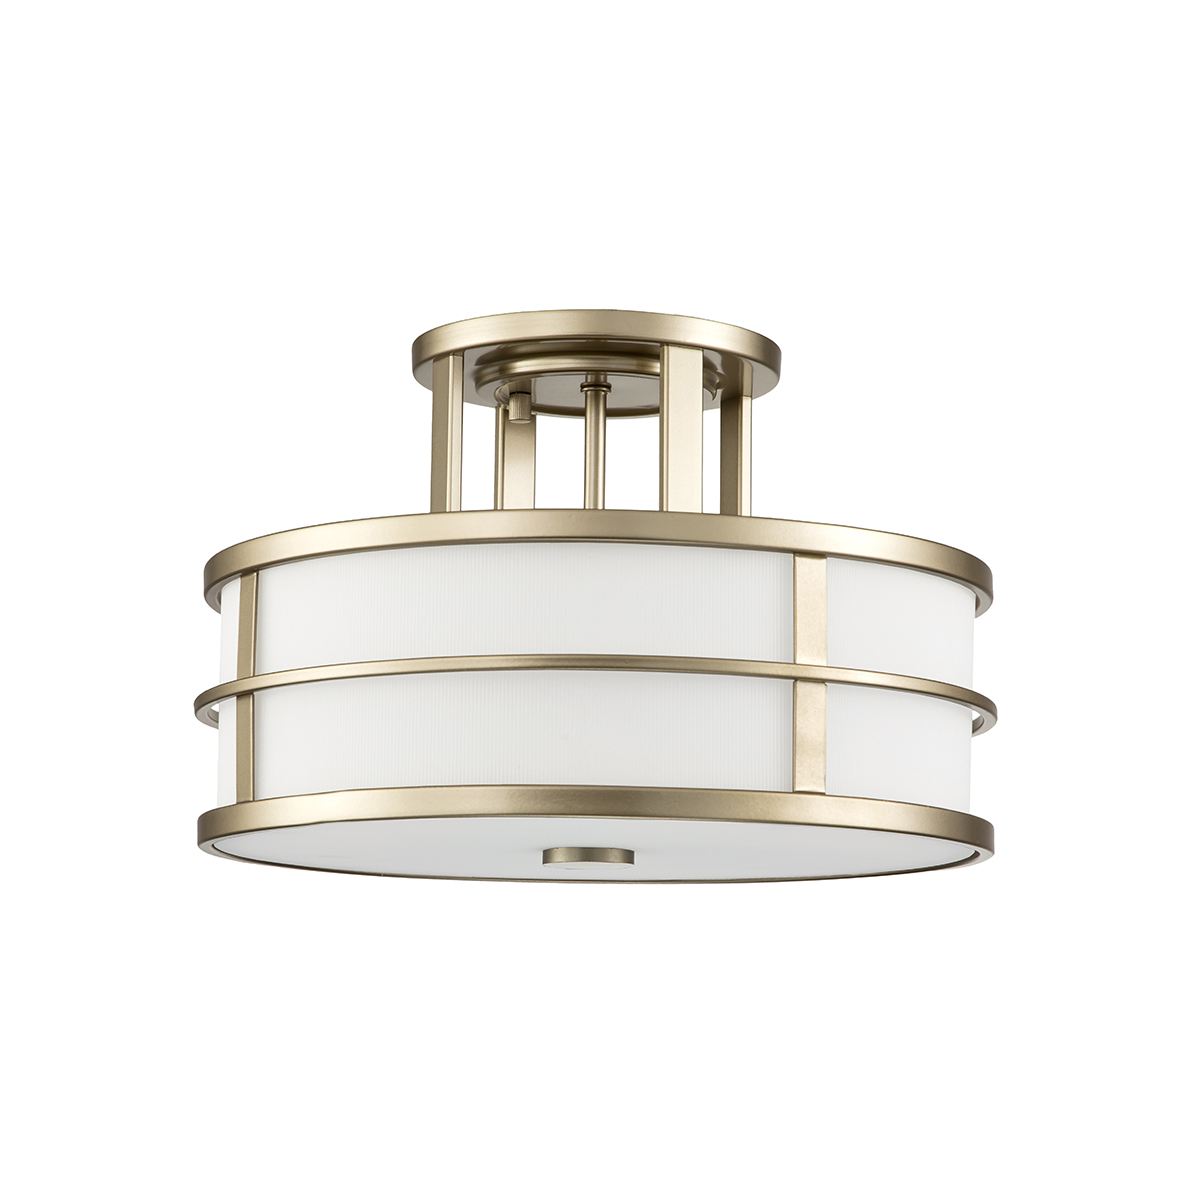 FUSION brass FE-FUSION-SF-PNBR Feiss